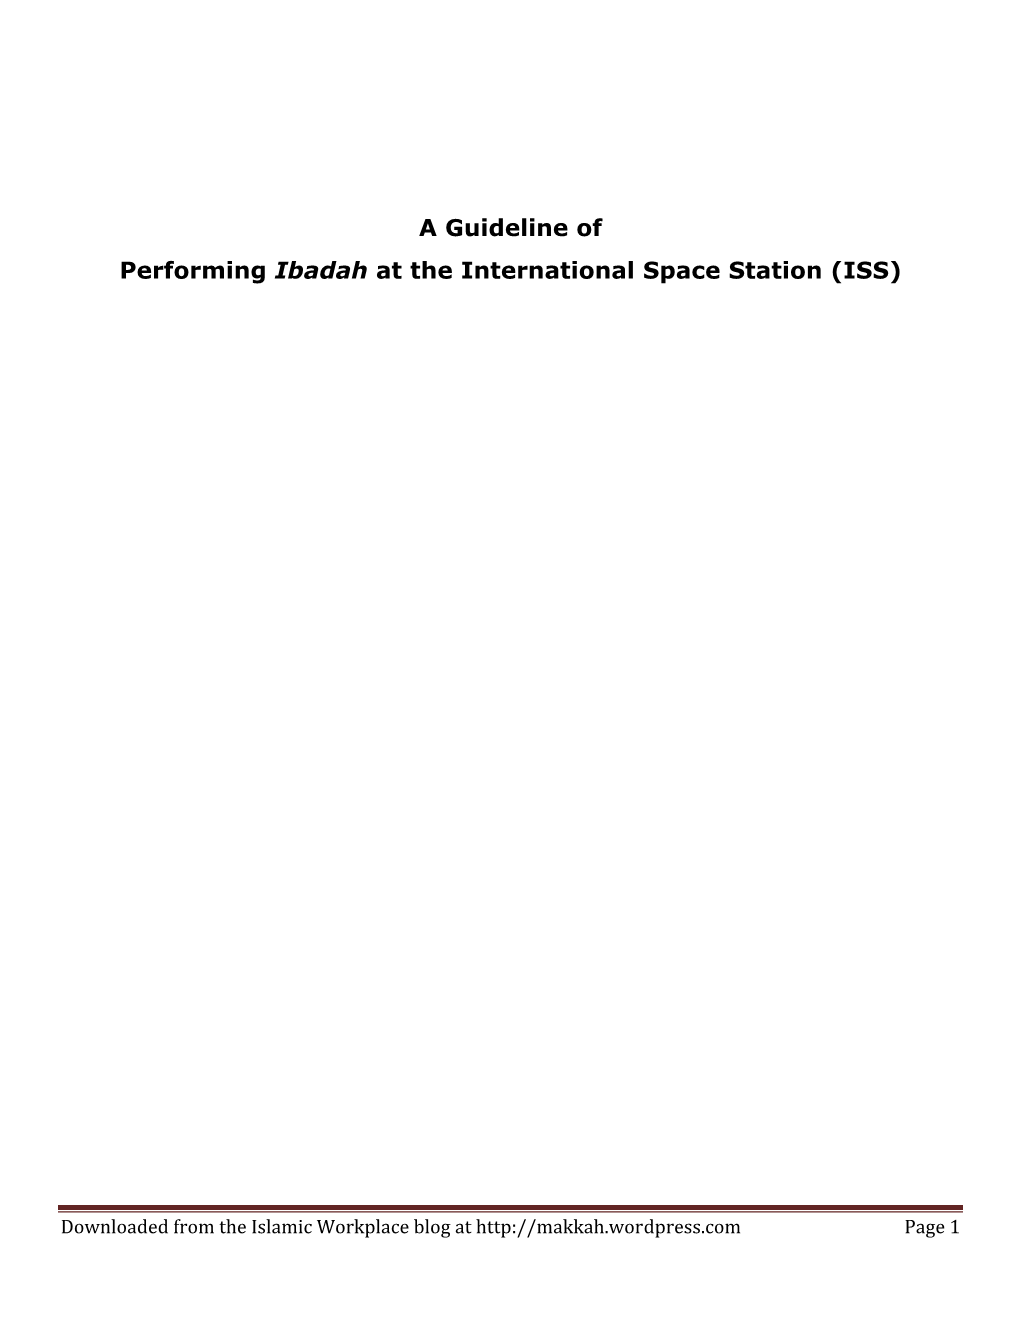 A Guideline of Performing Ibadah at the International Space Station (ISS)